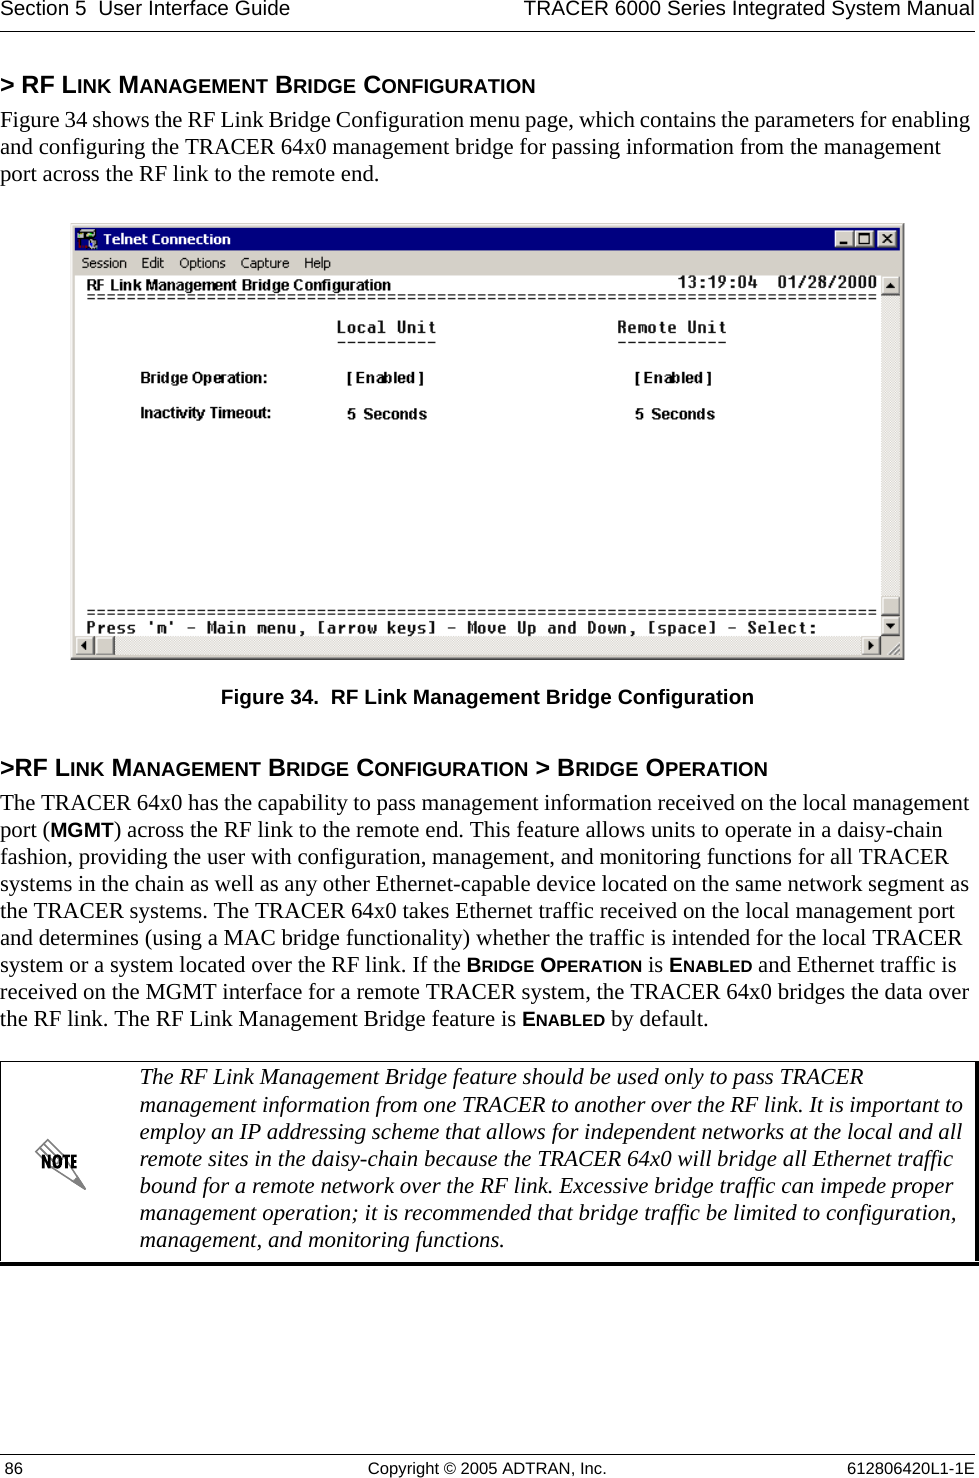 Section 5  User Interface Guide TRACER 6000 Series Integrated System Manual 86 Copyright © 2005 ADTRAN, Inc. 612806420L1-1E&gt; RF LINK MANAGEMENT BRIDGE CONFIGURATIONFigure 34 shows the RF Link Bridge Configuration menu page, which contains the parameters for enabling and configuring the TRACER 64x0 management bridge for passing information from the management port across the RF link to the remote end. Figure 34.  RF Link Management Bridge Configuration&gt;RF LINK MANAGEMENT BRIDGE CONFIGURATION &gt; BRIDGE OPERATIONThe TRACER 64x0 has the capability to pass management information received on the local management port (MGMT) across the RF link to the remote end. This feature allows units to operate in a daisy-chain fashion, providing the user with configuration, management, and monitoring functions for all TRACER systems in the chain as well as any other Ethernet-capable device located on the same network segment as the TRACER systems. The TRACER 64x0 takes Ethernet traffic received on the local management port and determines (using a MAC bridge functionality) whether the traffic is intended for the local TRACER system or a system located over the RF link. If the BRIDGE OPERATION is ENABLED and Ethernet traffic is received on the MGMT interface for a remote TRACER system, the TRACER 64x0 bridges the data over the RF link. The RF Link Management Bridge feature is ENABLED by default.The RF Link Management Bridge feature should be used only to pass TRACER management information from one TRACER to another over the RF link. It is important to employ an IP addressing scheme that allows for independent networks at the local and all remote sites in the daisy-chain because the TRACER 64x0 will bridge all Ethernet traffic bound for a remote network over the RF link. Excessive bridge traffic can impede proper management operation; it is recommended that bridge traffic be limited to configuration, management, and monitoring functions.